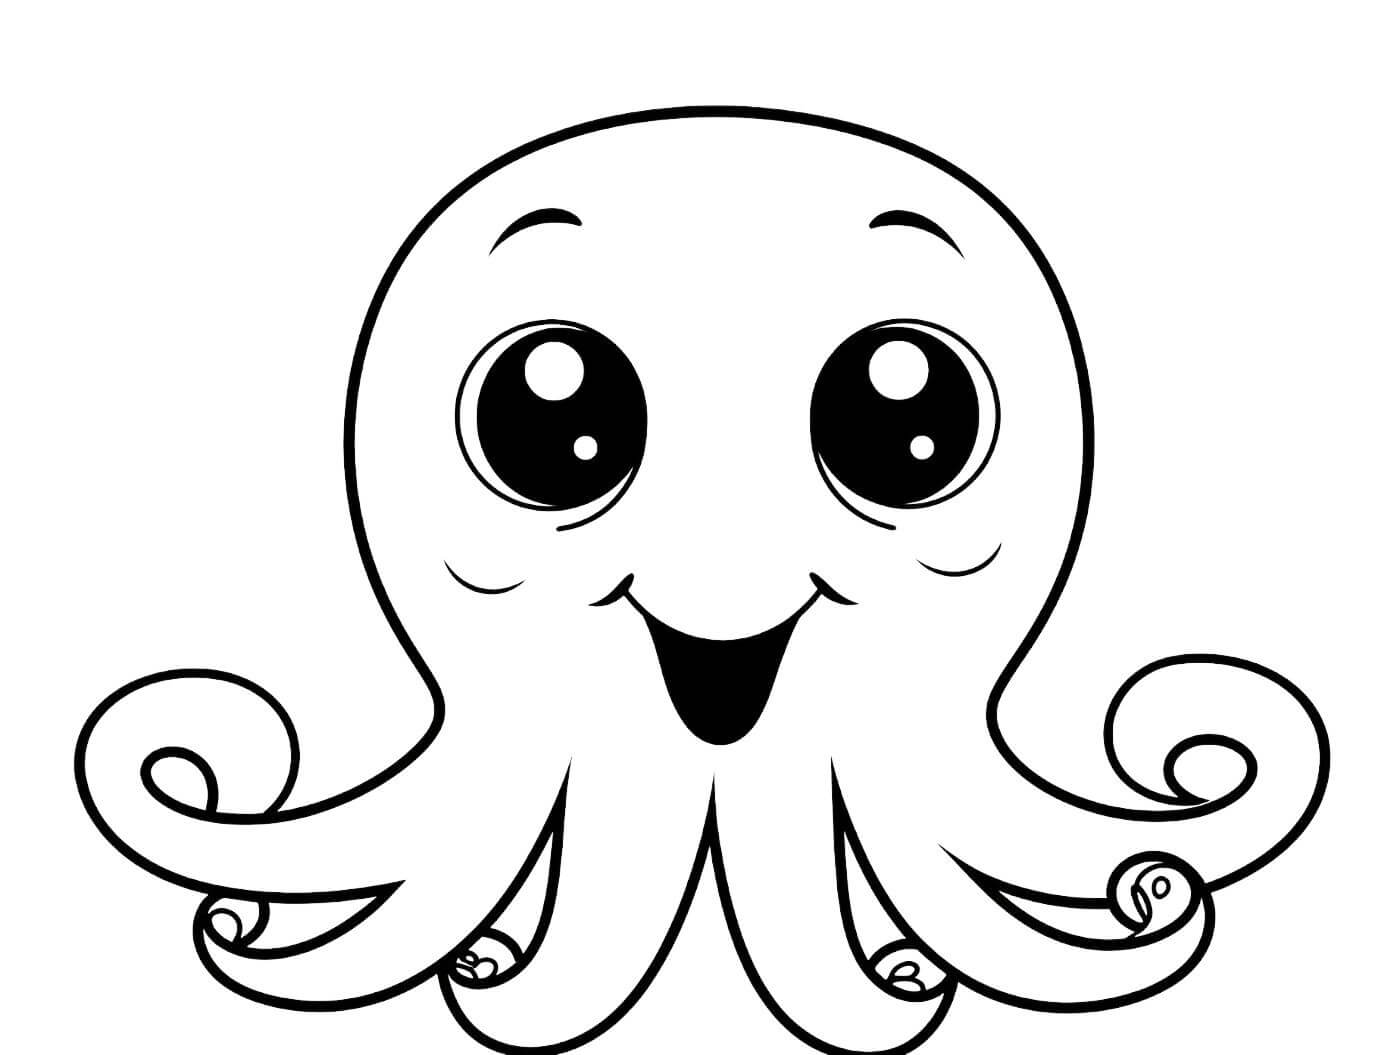 Cute Octopus coloring page - Download, Print or Color Online for Free